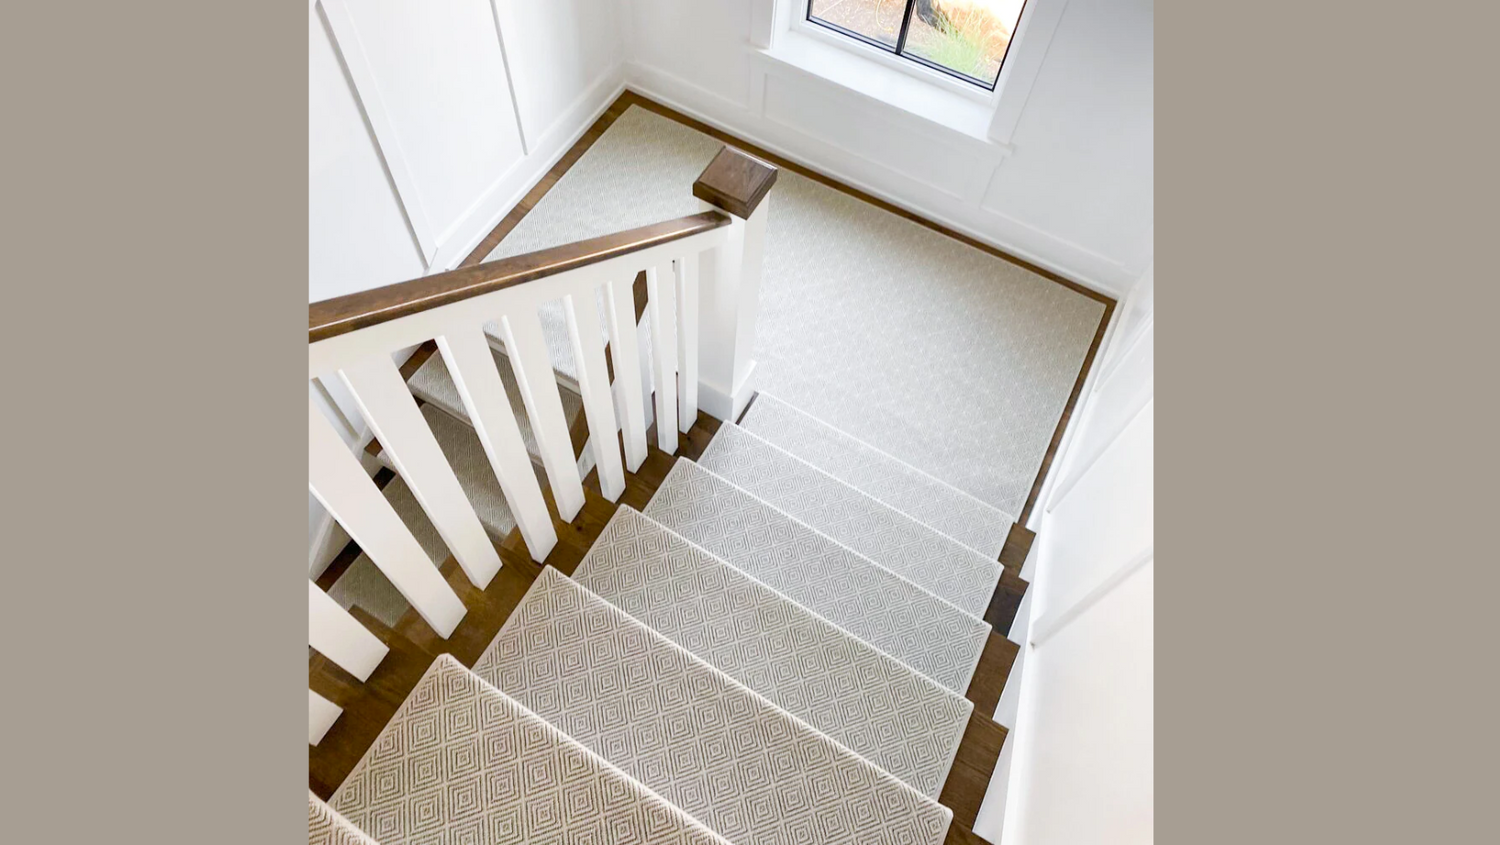 Where to Buy Stair Treads?